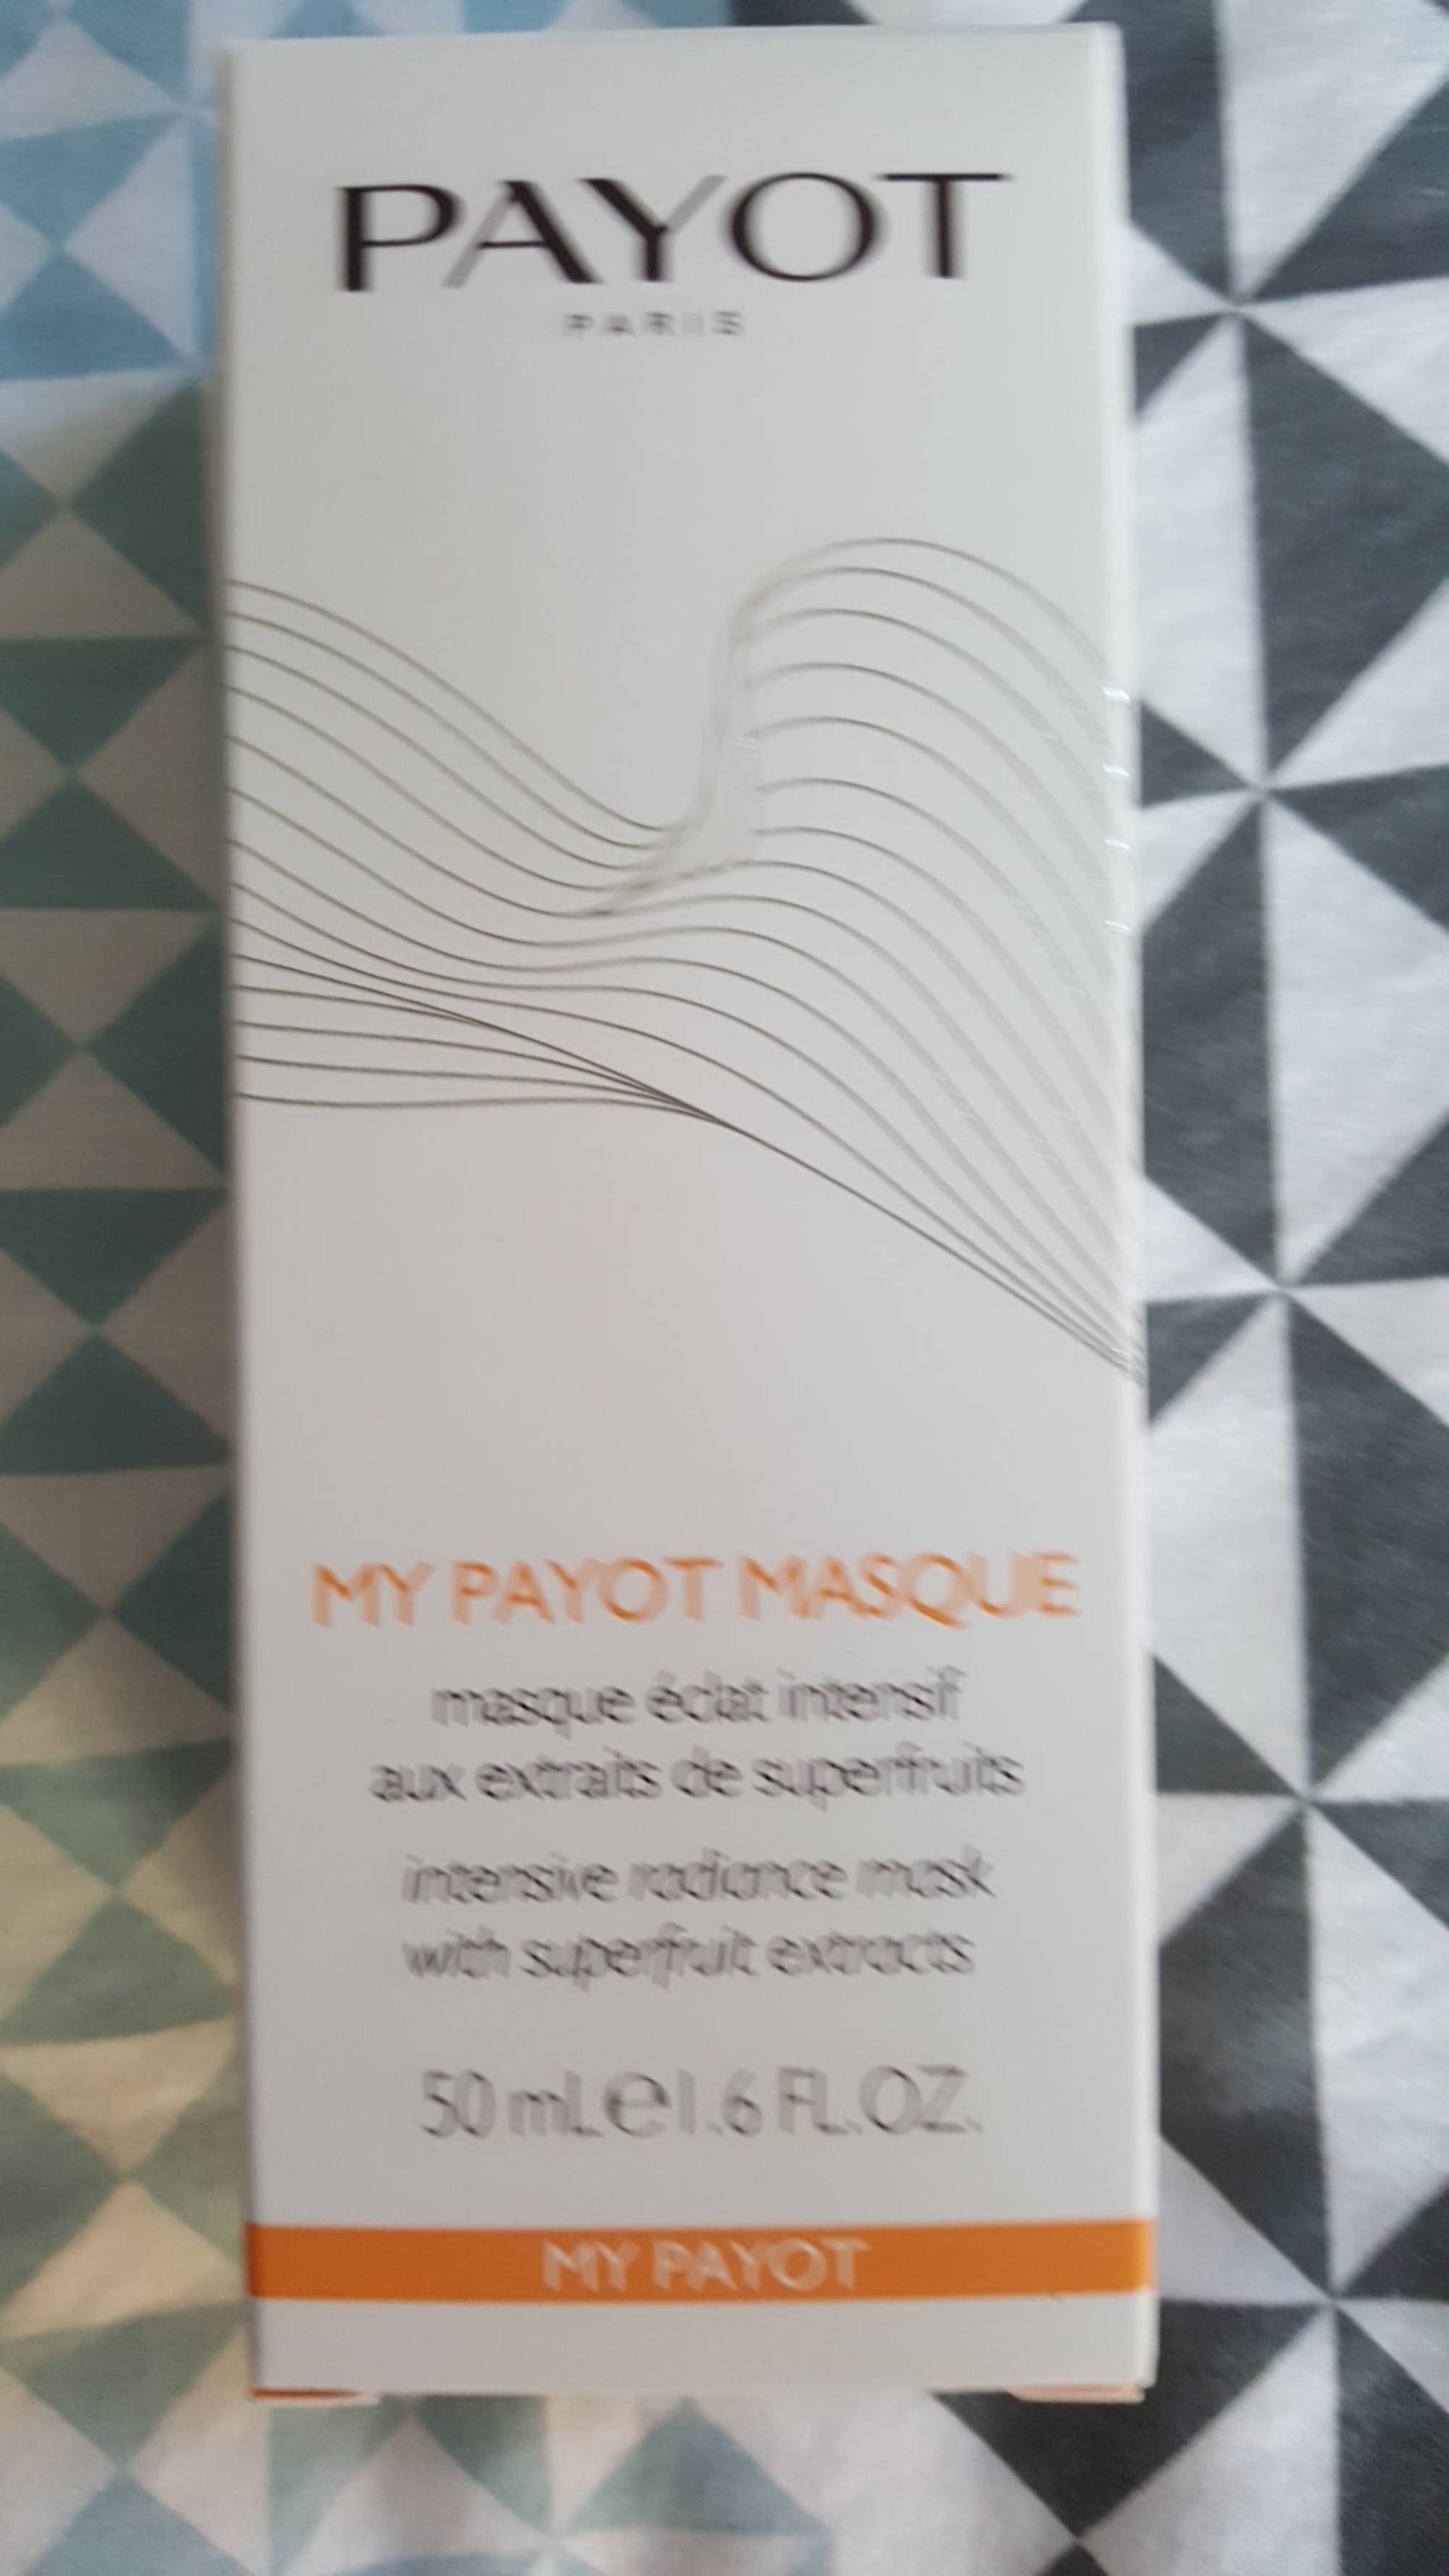 PAYOT - My payot - Masque éclat intensif